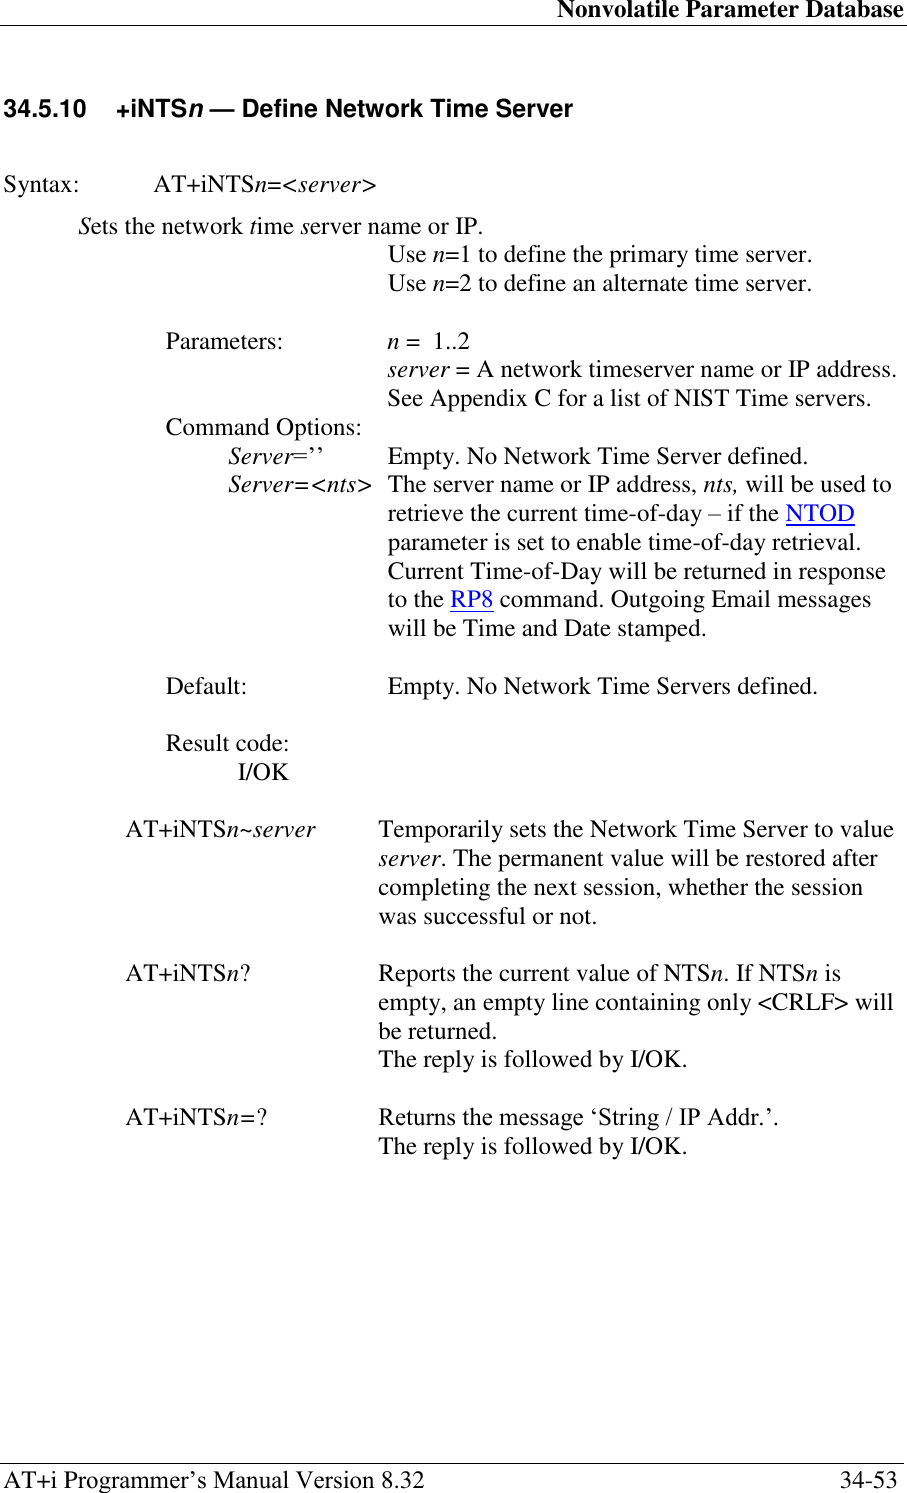 Nonvolatile Parameter Database AT+i Programmer‘s Manual Version 8.32  34-53 34.5.10  +iNTSn — Define Network Time Server   Syntax:  AT+iNTSn=&lt;server&gt;   Sets the network time server name or IP. Use n=1 to define the primary time server. Use n=2 to define an alternate time server.  Parameters:  n =  1..2  server = A network timeserver name or IP address.   See Appendix C for a list of NIST Time servers. Command Options: Server=‘‘    Empty. No Network Time Server defined. Server=&lt;nts&gt;  The server name or IP address, nts, will be used to retrieve the current time-of-day – if the NTOD parameter is set to enable time-of-day retrieval. Current Time-of-Day will be returned in response to the RP8 command. Outgoing Email messages will be Time and Date stamped.   Default:  Empty. No Network Time Servers defined.  Result code: I/OK  AT+iNTSn~server  Temporarily sets the Network Time Server to value server. The permanent value will be restored after completing the next session, whether the session was successful or not.  AT+iNTSn? Reports the current value of NTSn. If NTSn is empty, an empty line containing only &lt;CRLF&gt; will be returned.   The reply is followed by I/OK.  AT+iNTSn=? Returns the message ‗String / IP Addr.‘.   The reply is followed by I/OK. 